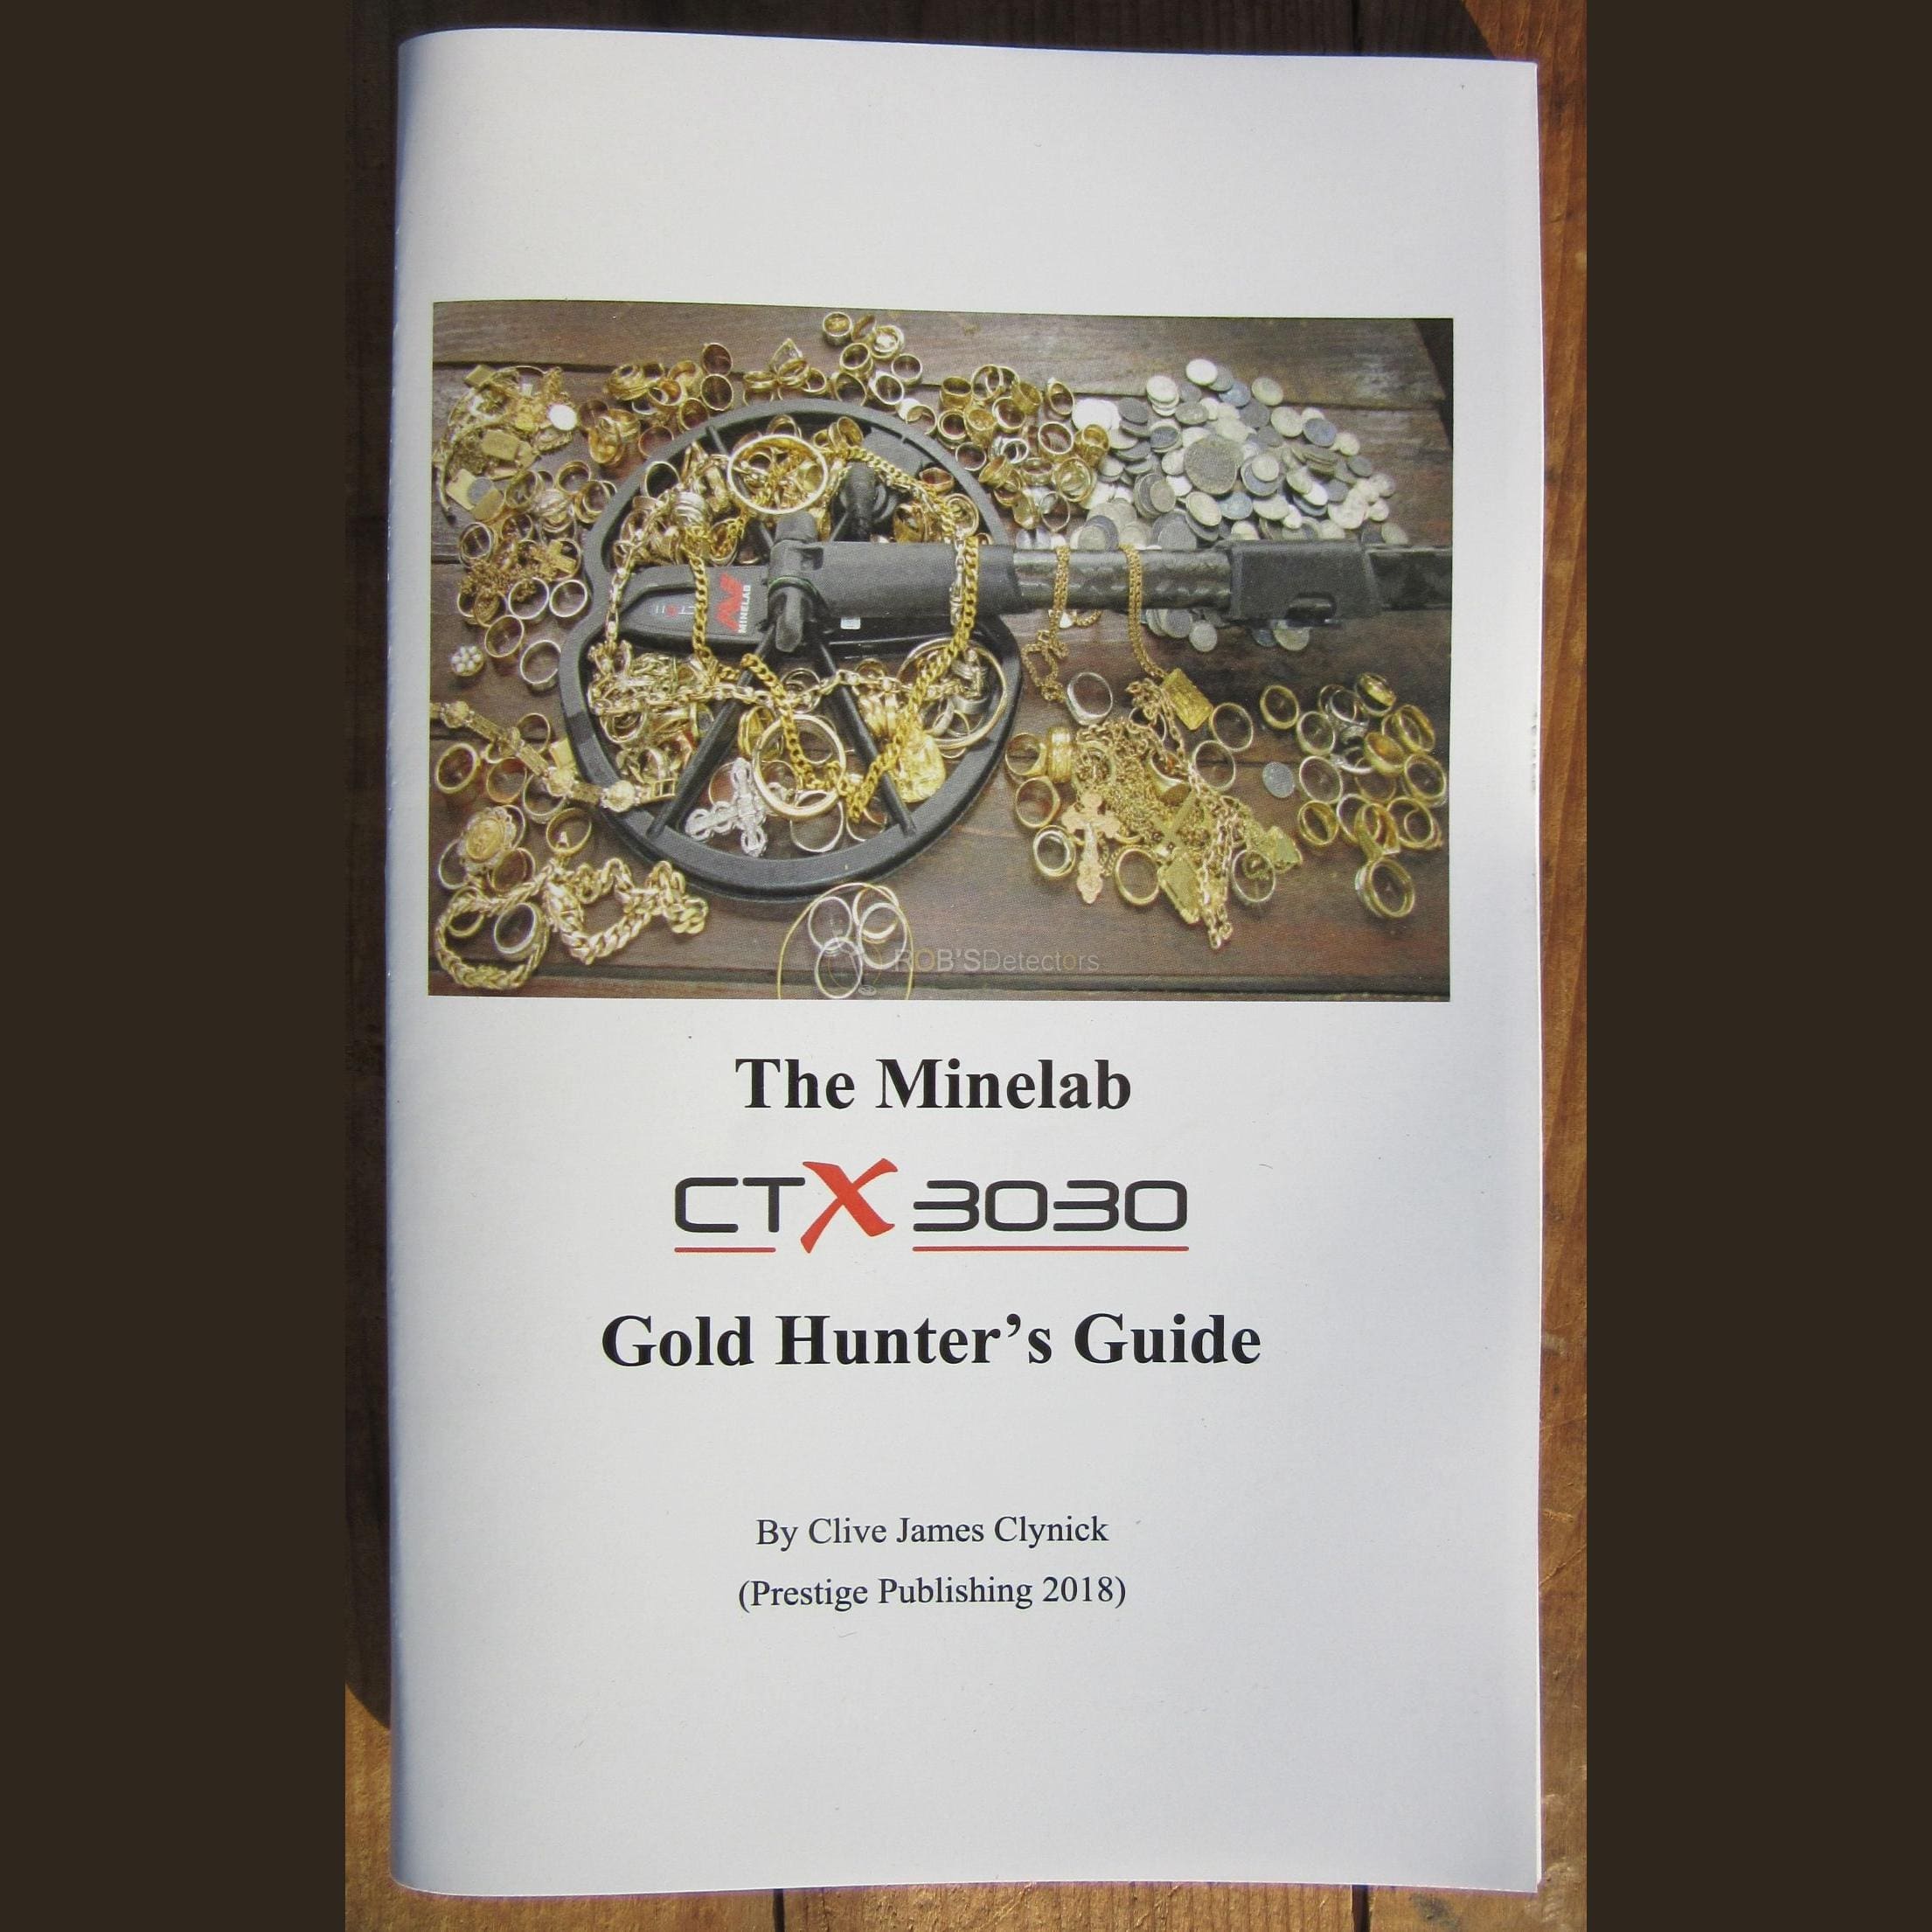 The Minelab CTX 3030 Gold Hunter’s Guide Book